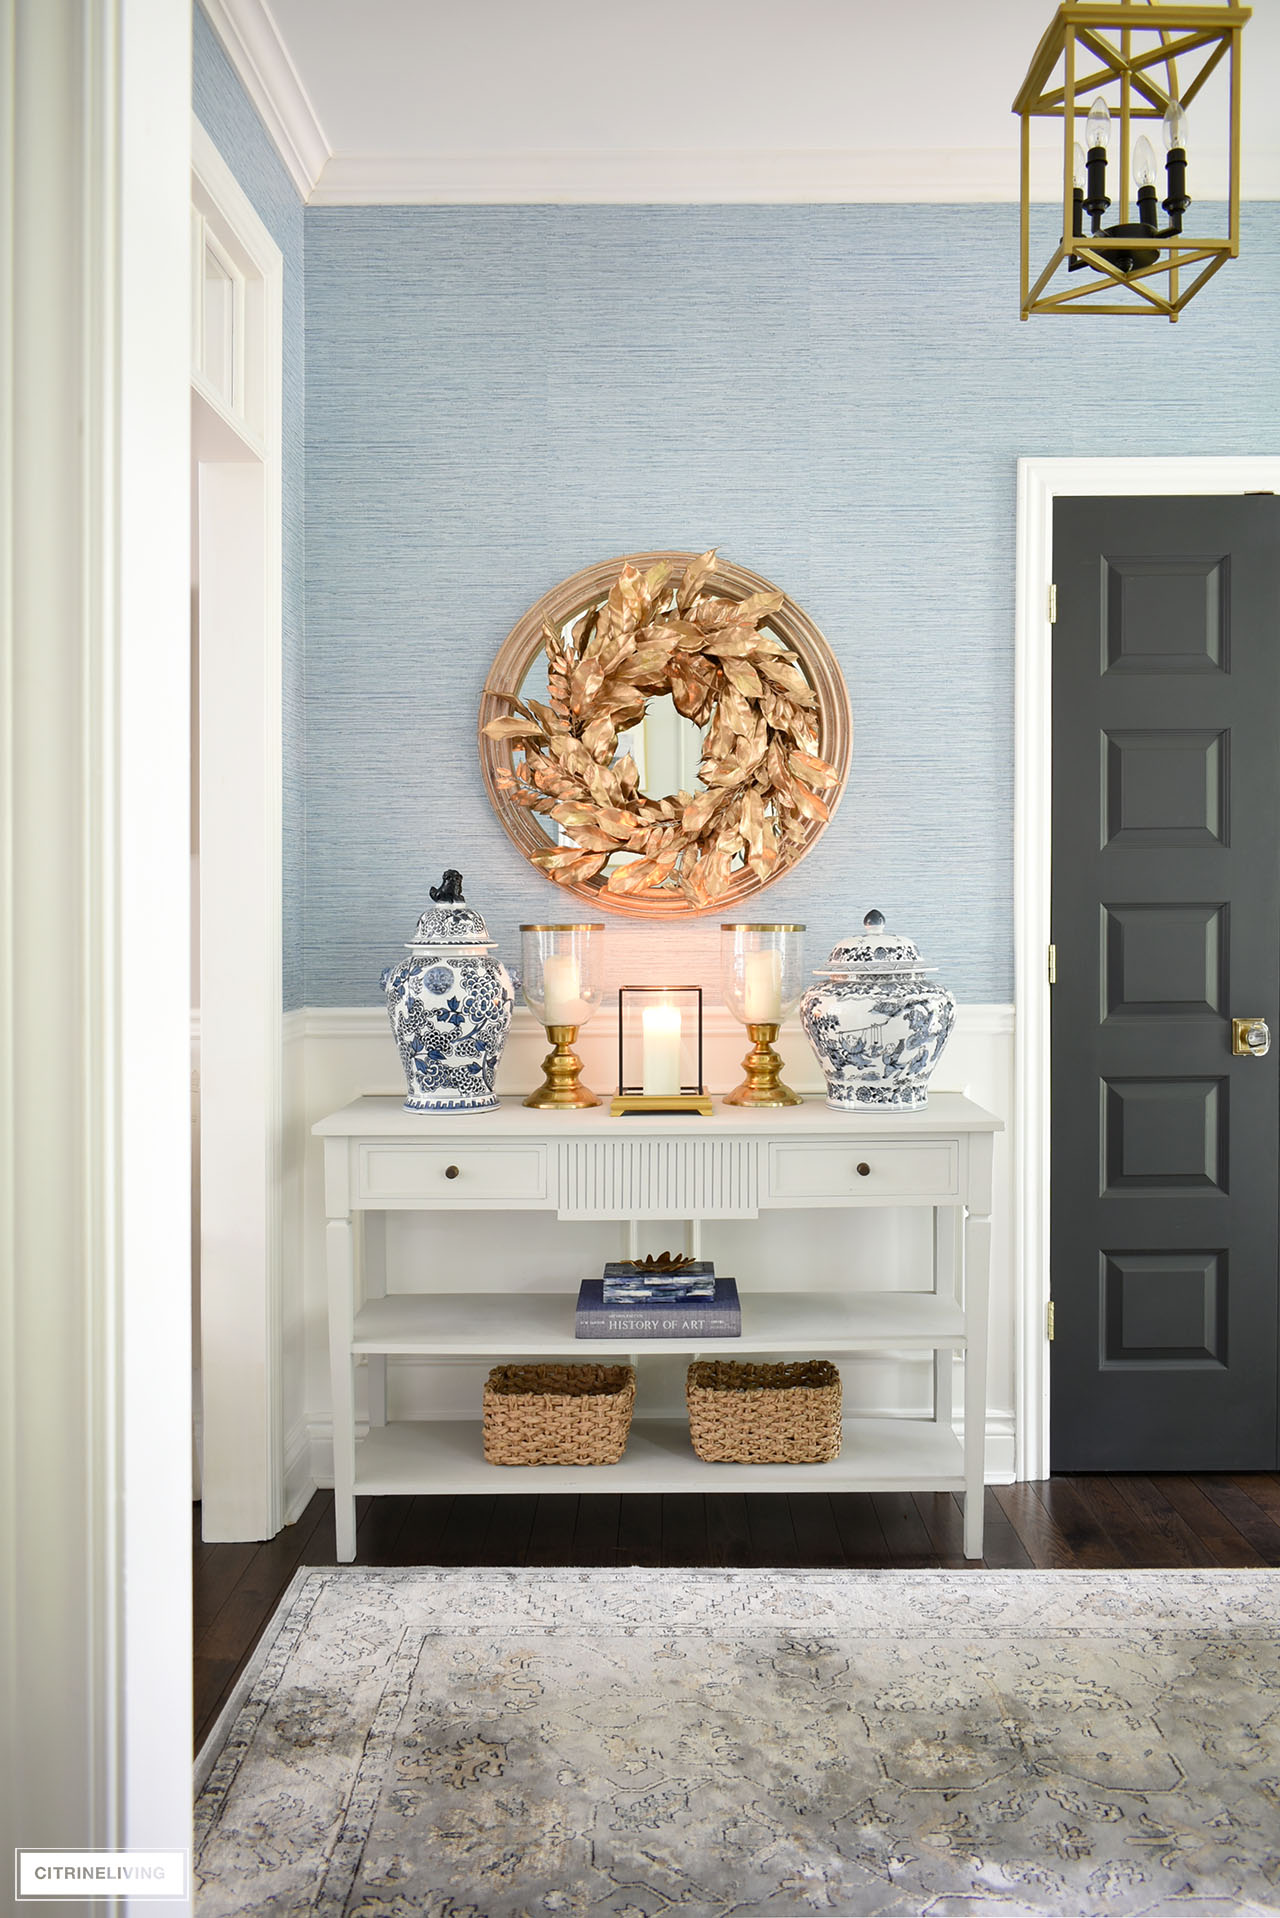 Beautiful fall entryway decor with gold and blue accessories, a beautiful gold wreath, and woven baskets for a timeless and elegant look.